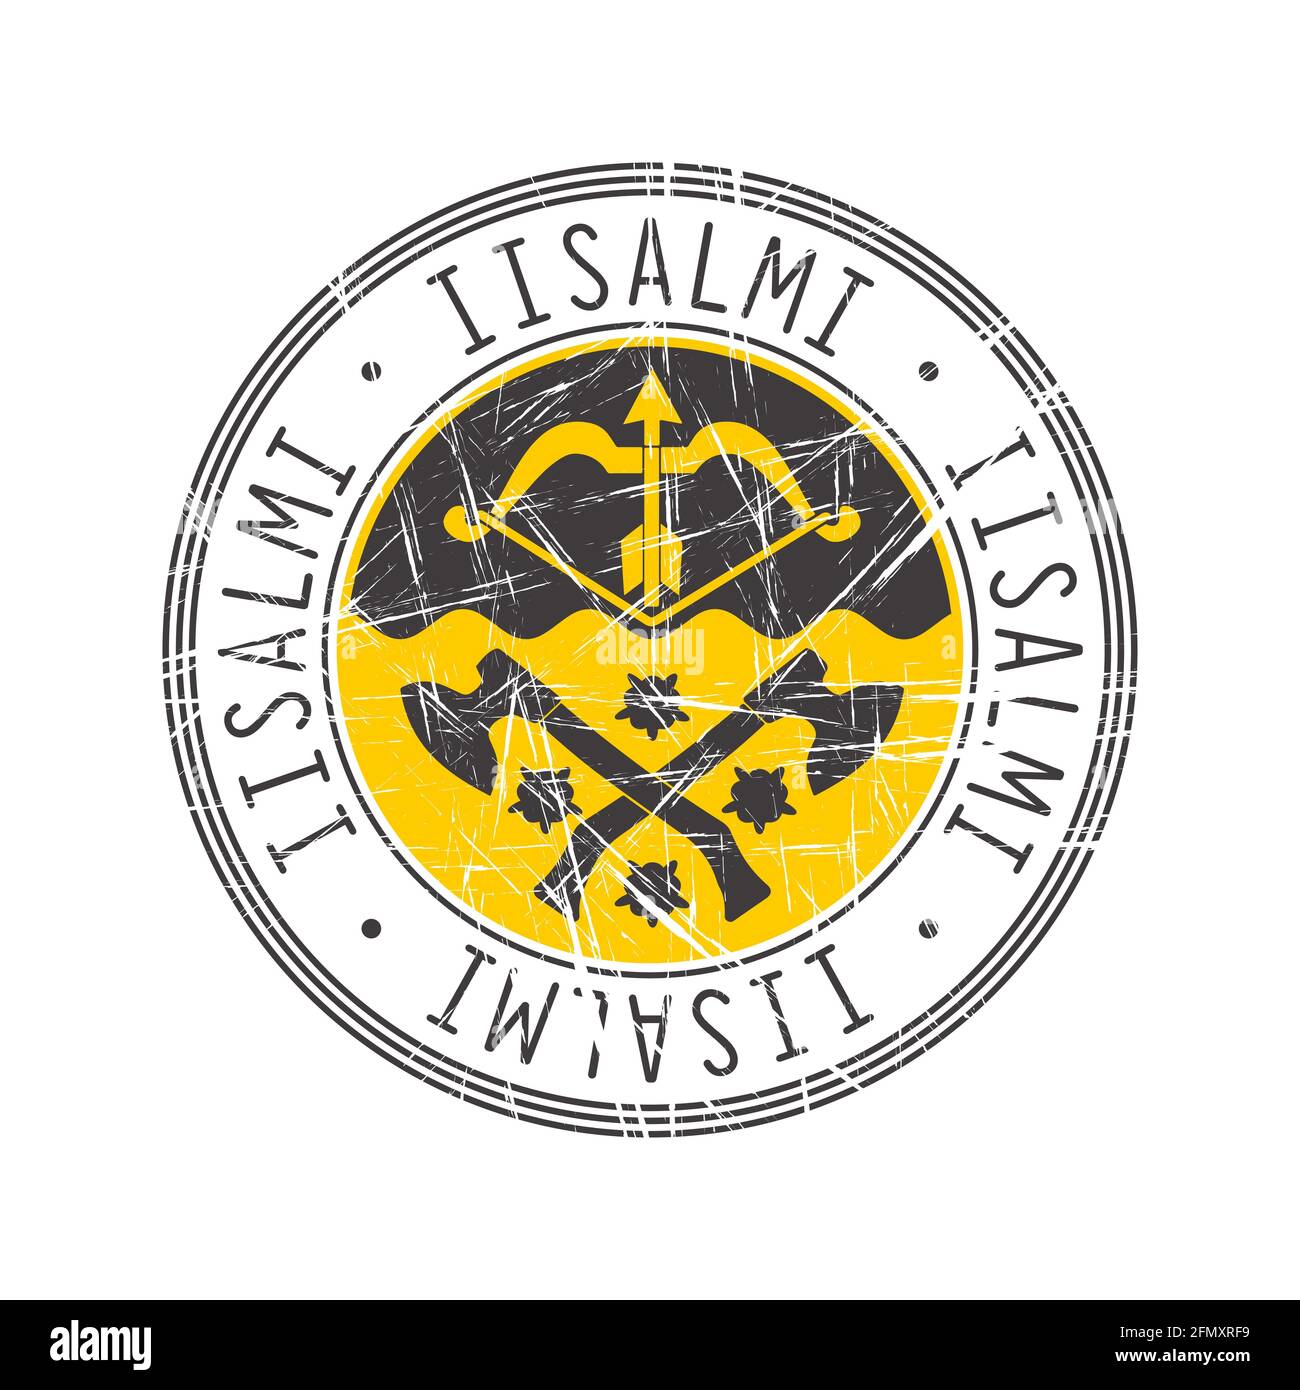 Iislami city, Finland. Grunge postal rubber stamp over white background Stock Vector